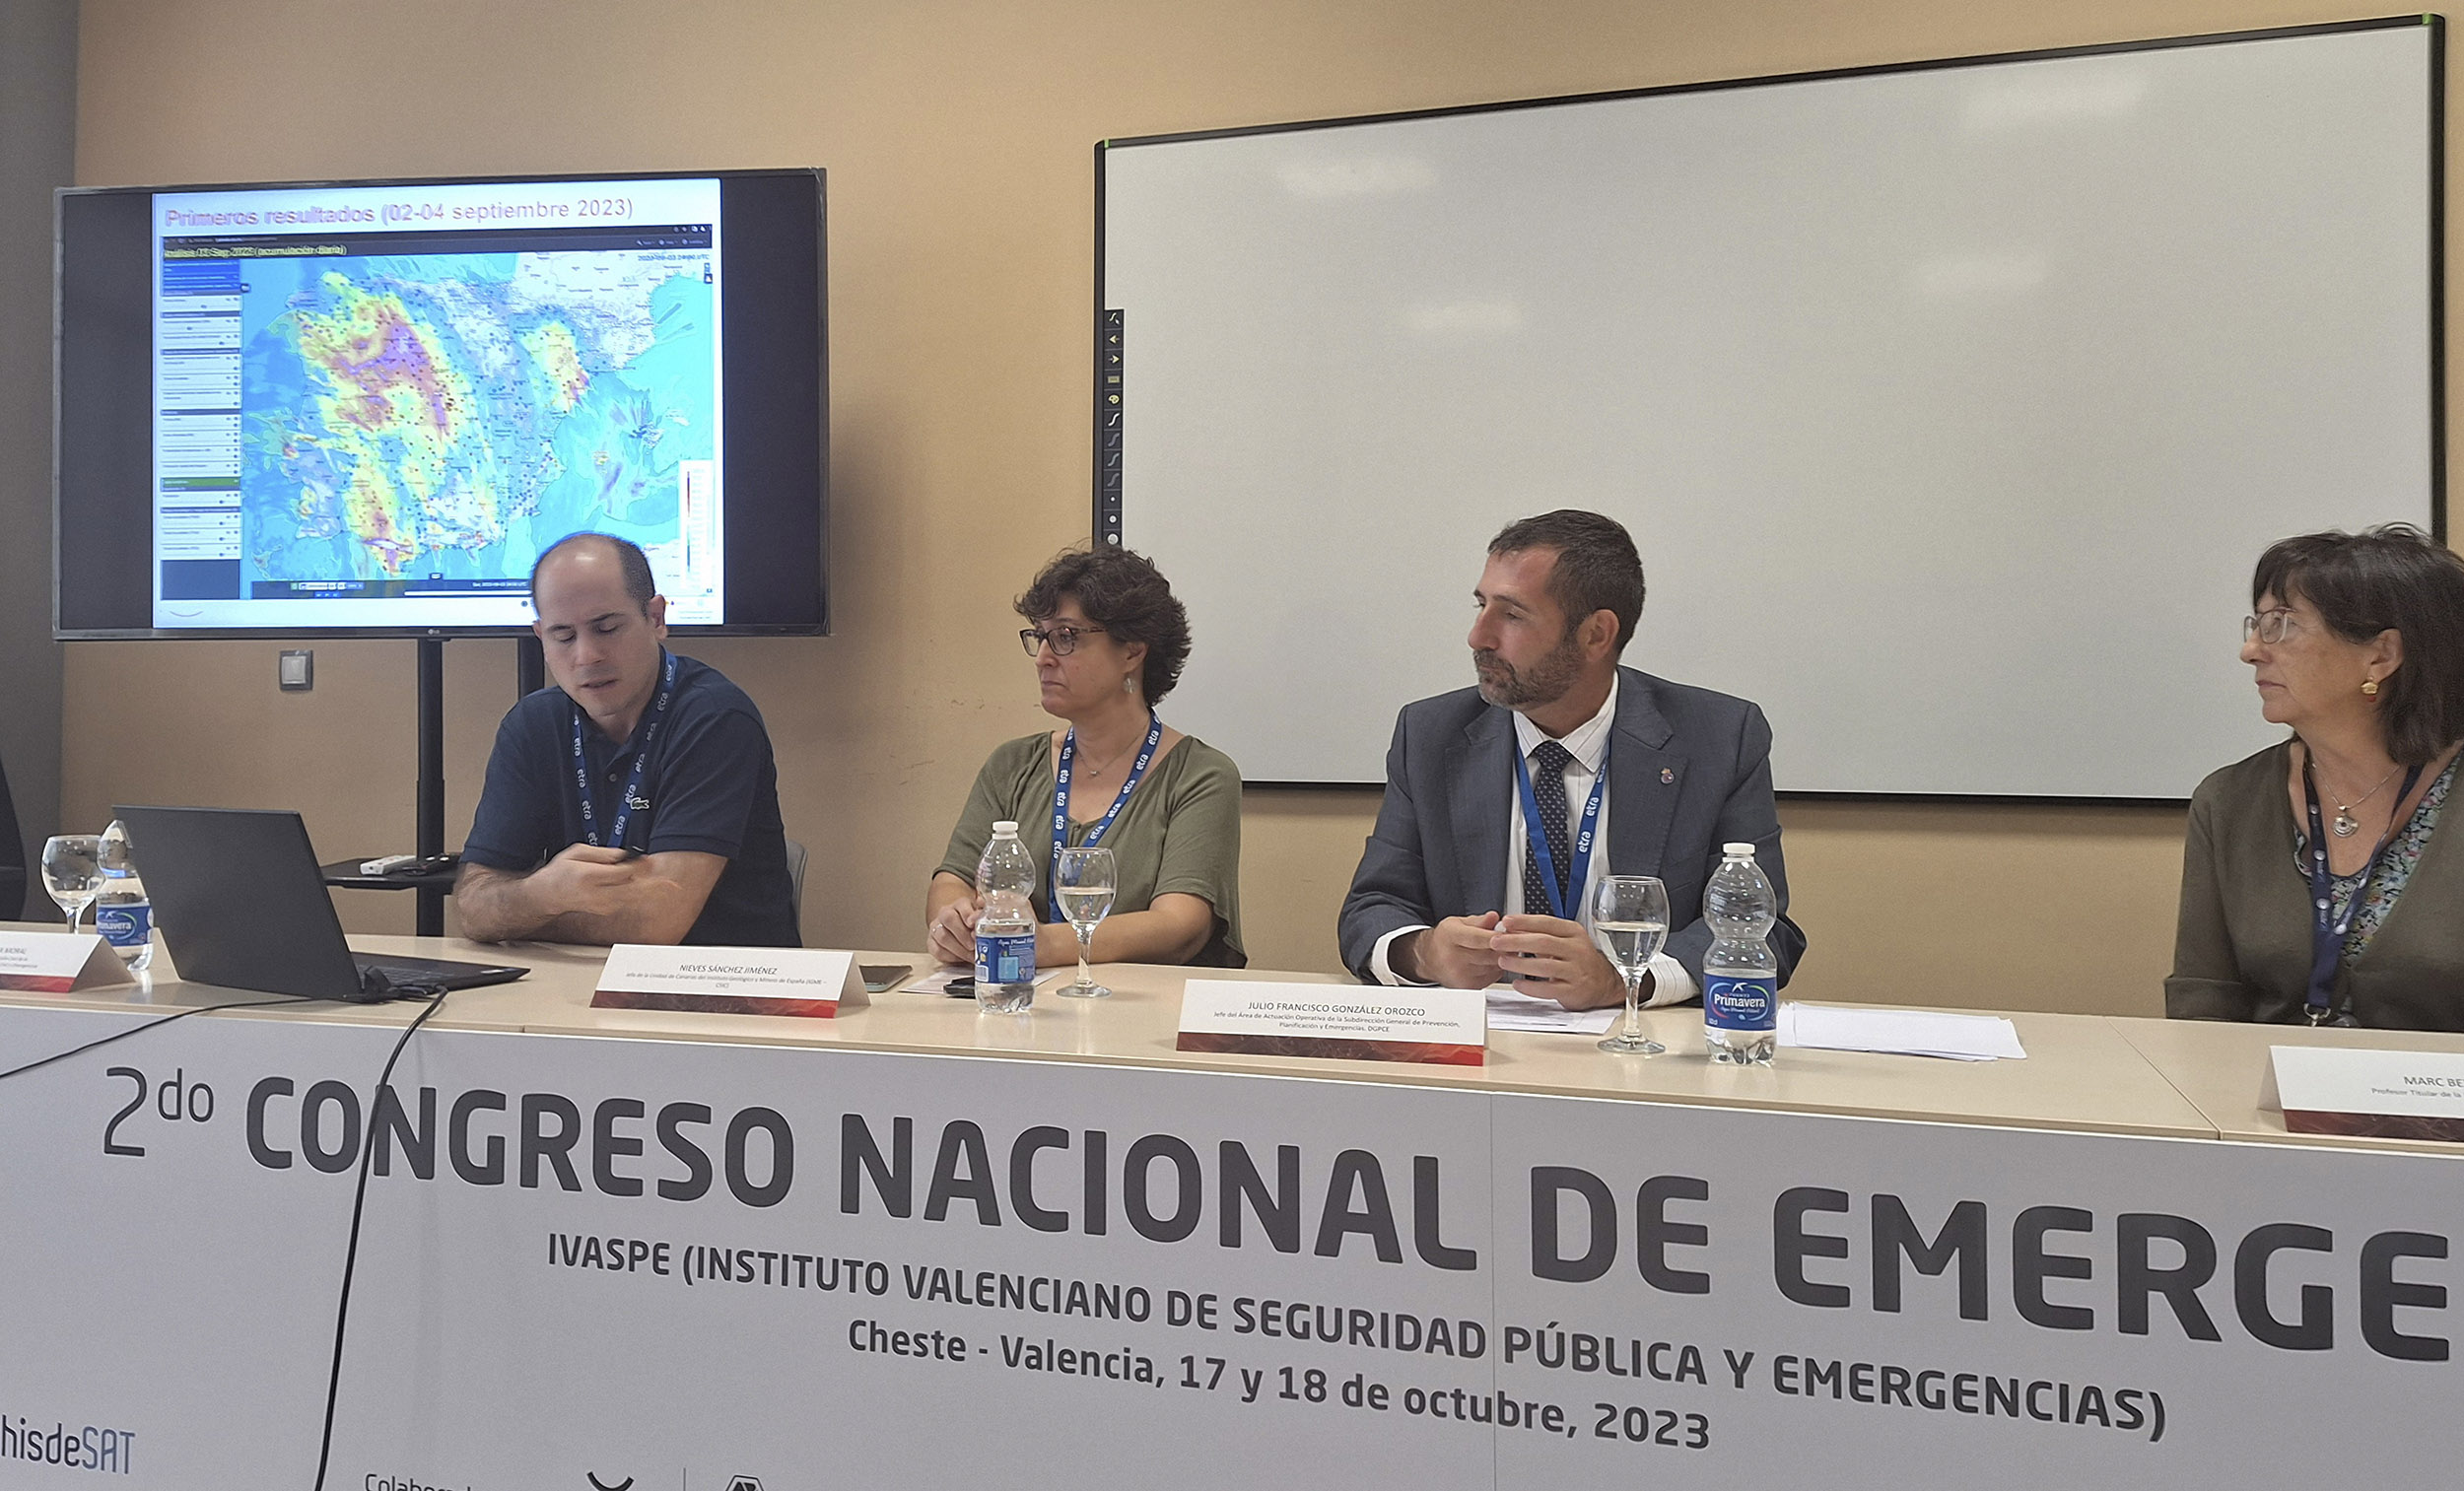 EDERA project took part in the Civil Protection and Emergencies National Congress